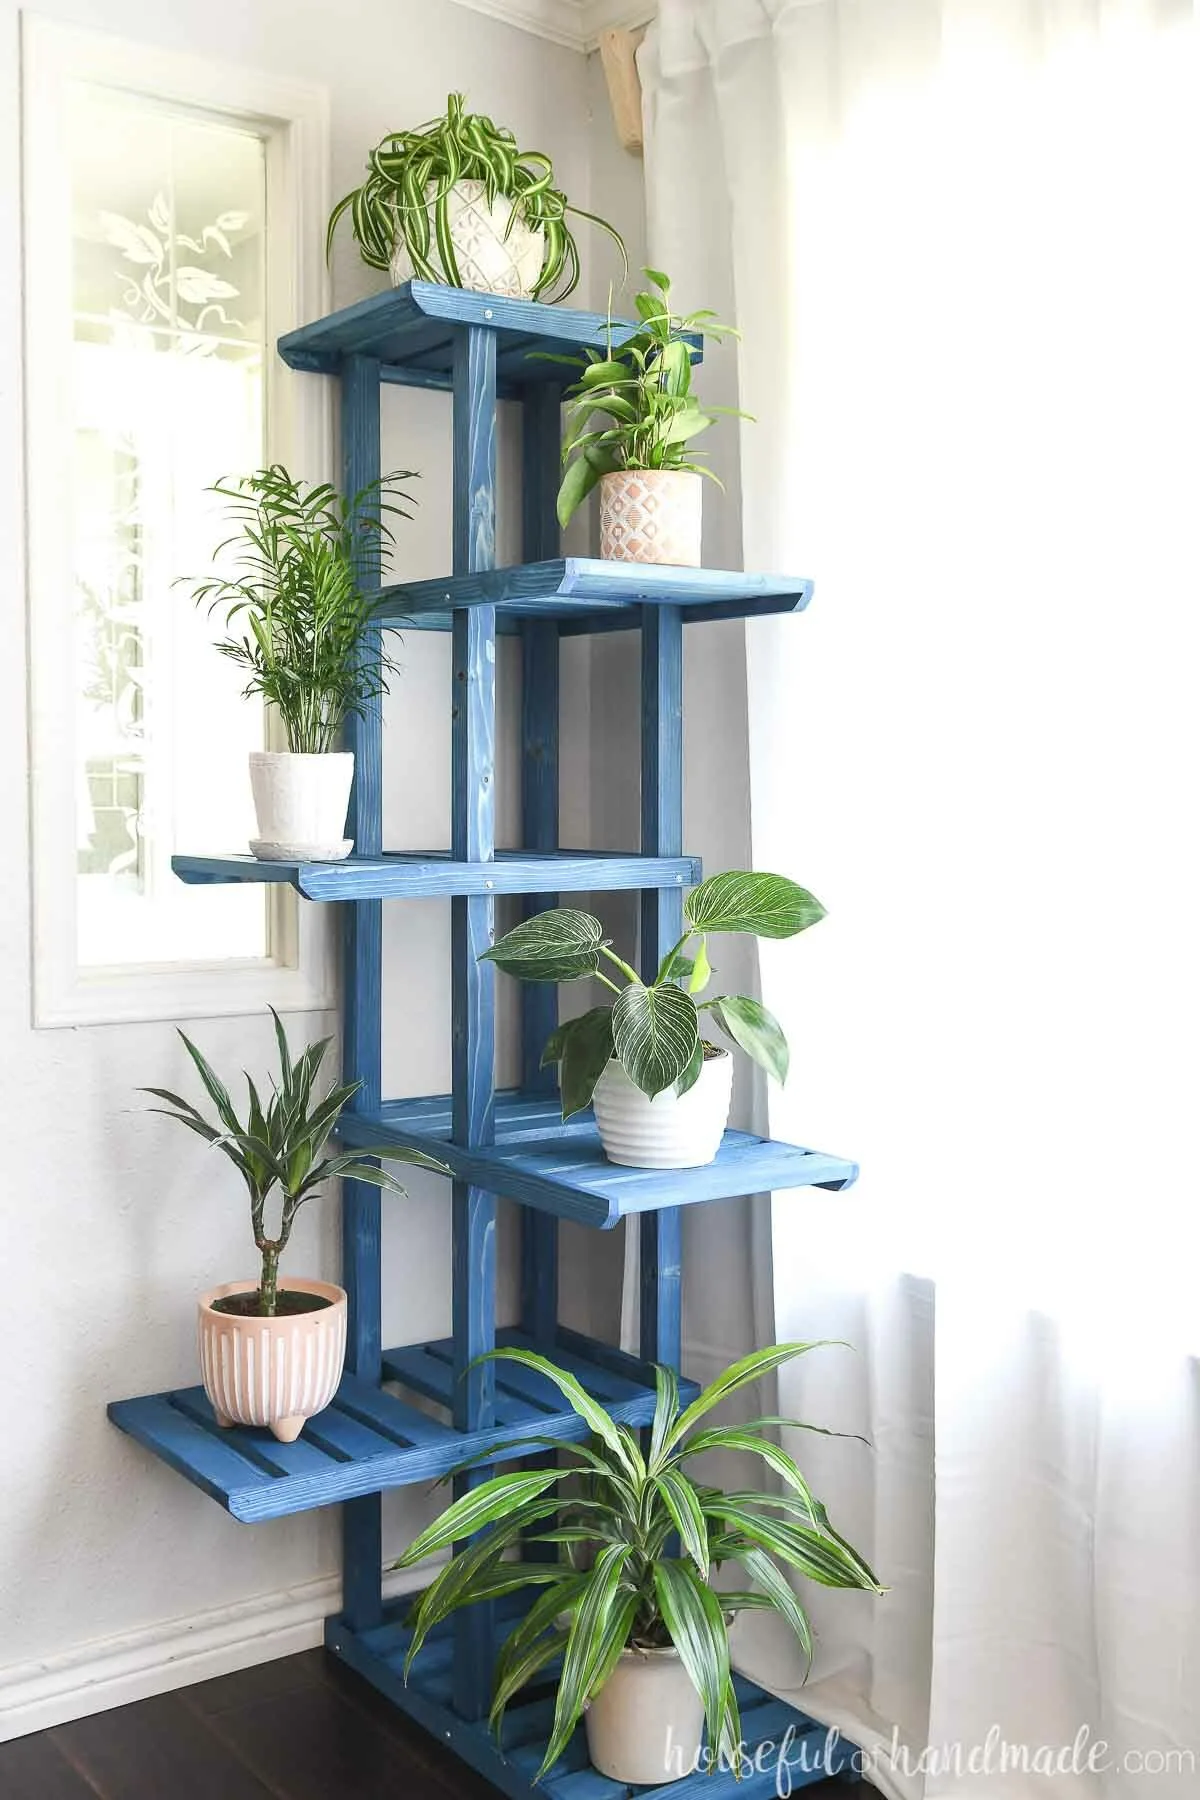 Tall Corner Plant Stand Build Plans   Houseful of Handmade